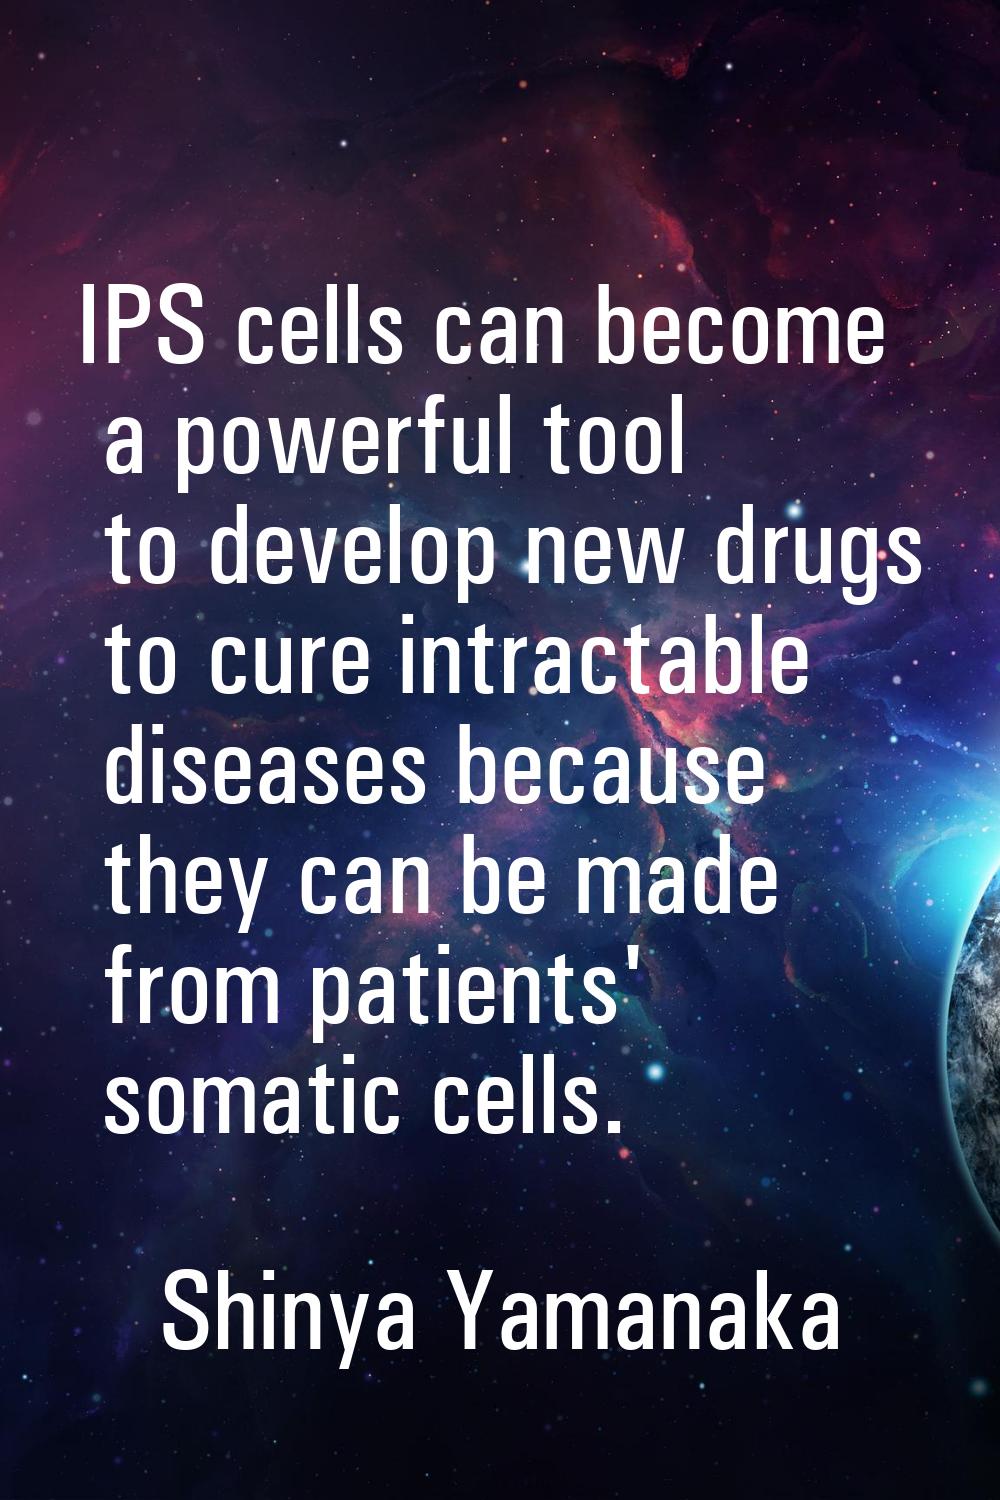 IPS cells can become a powerful tool to develop new drugs to cure intractable diseases because they